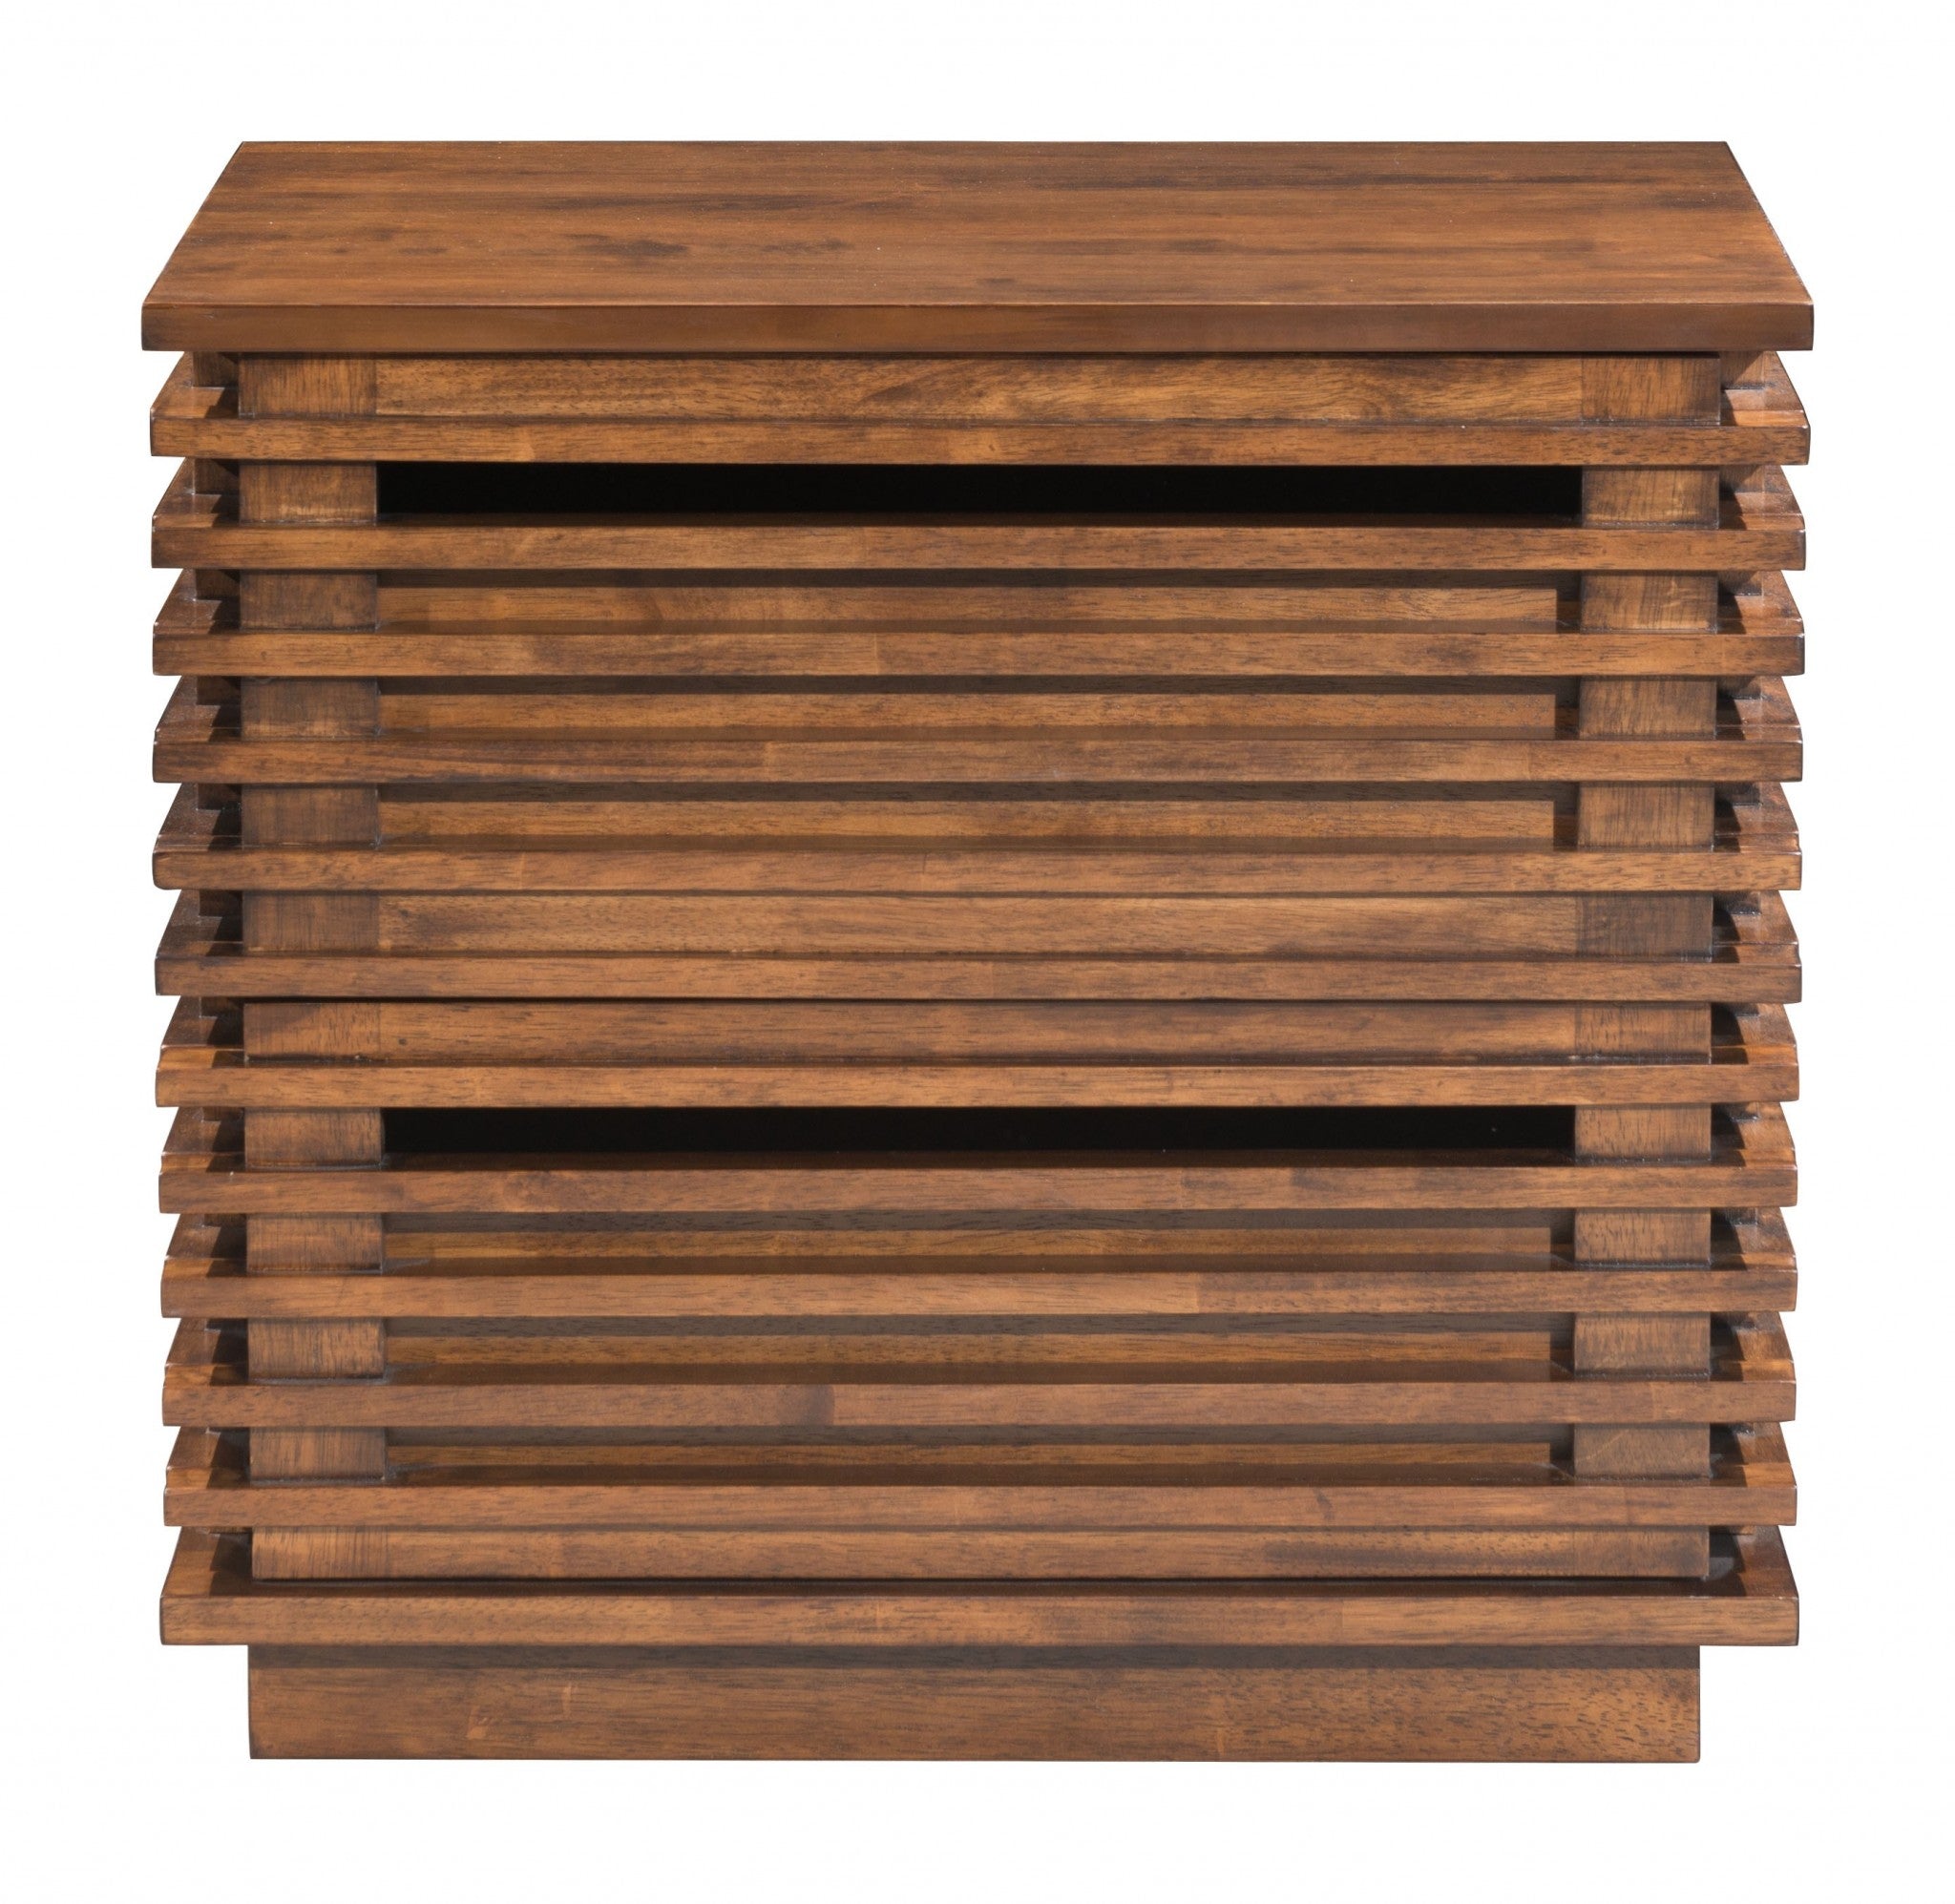 22" Walnut Solid Wood Modern Slat Design End Table with Drawers